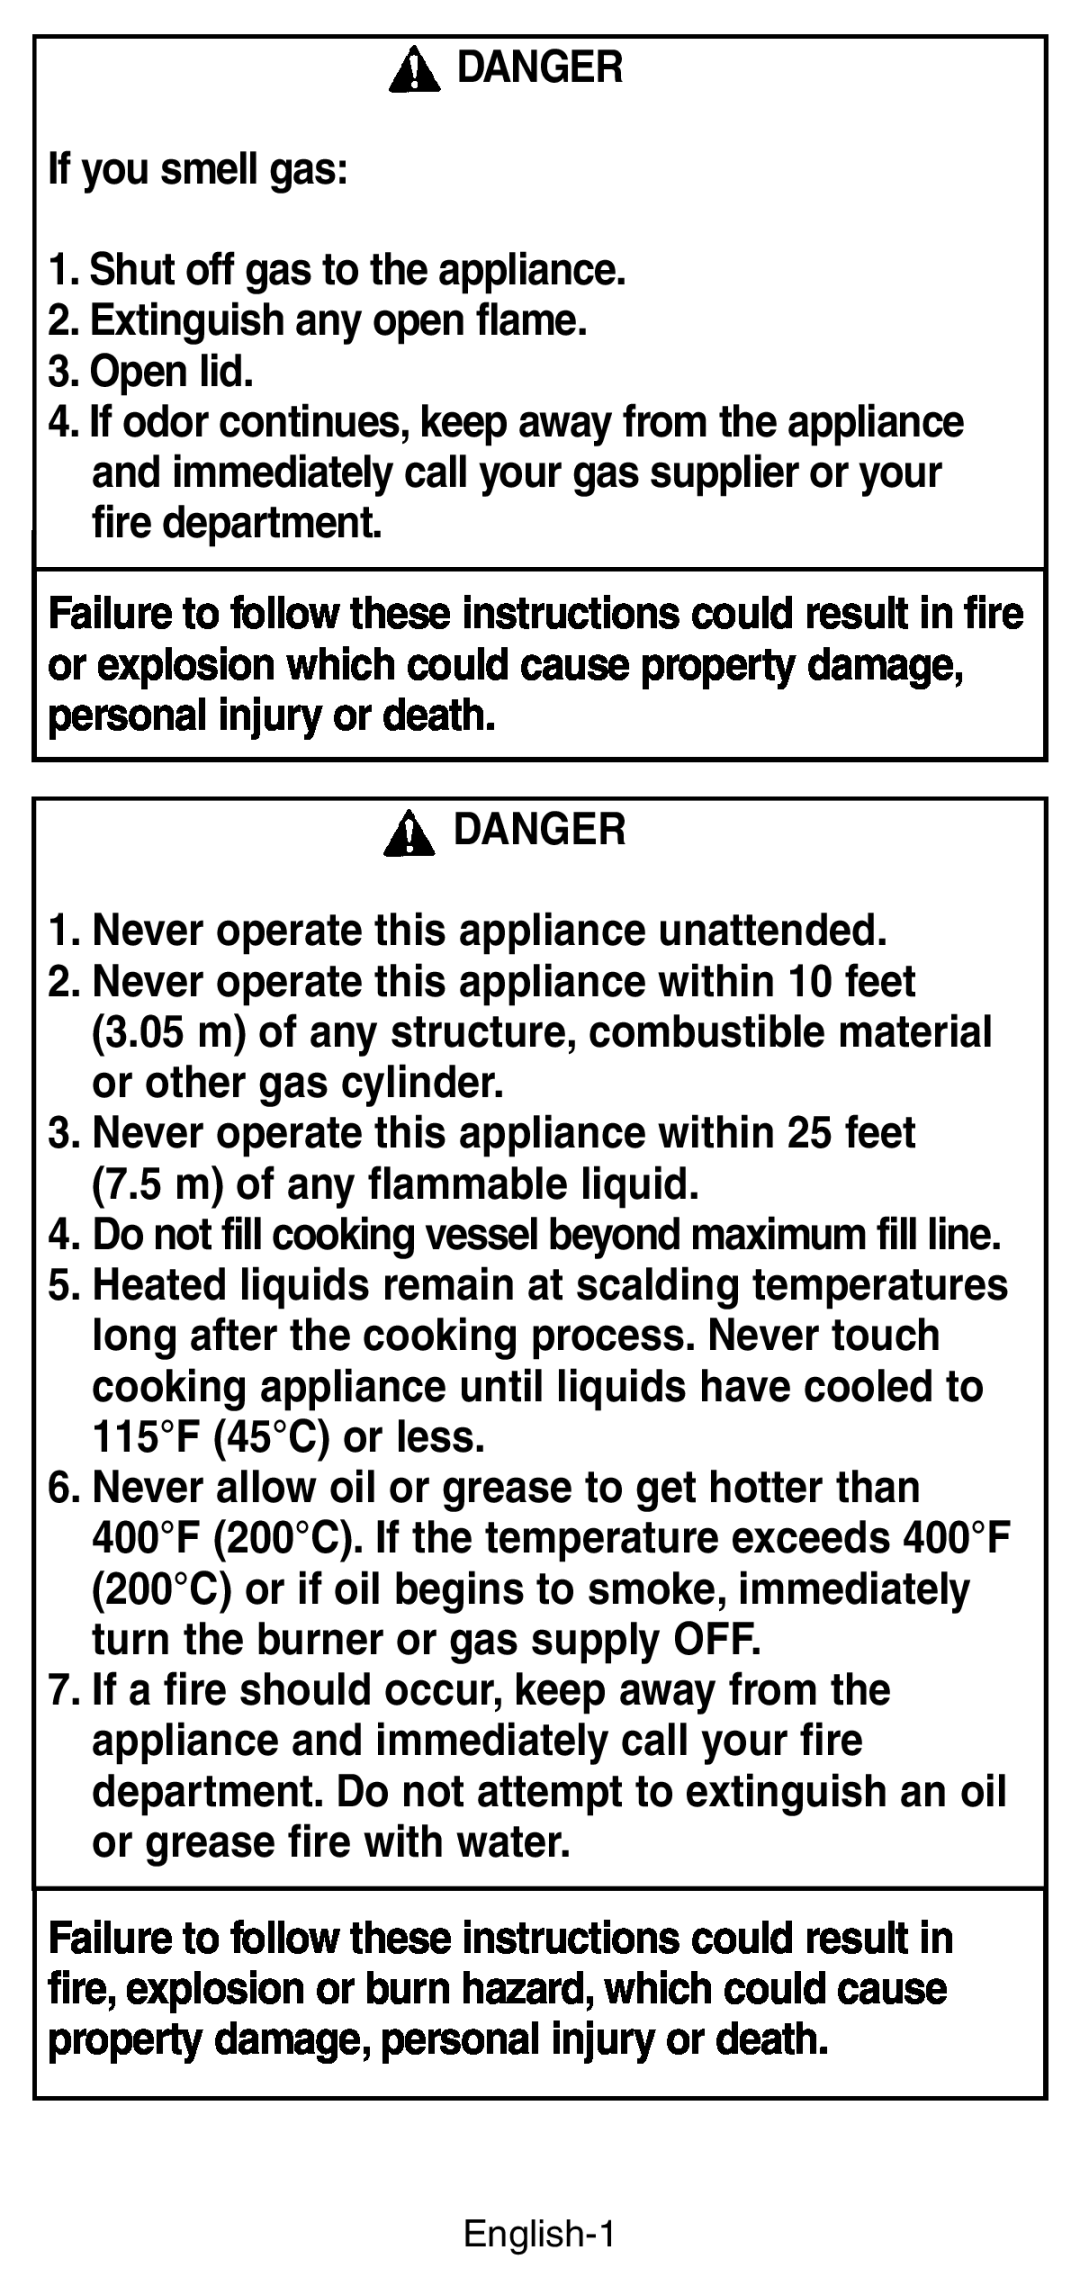 Coleman 9994 instruction manual DANGER If you smell gas 